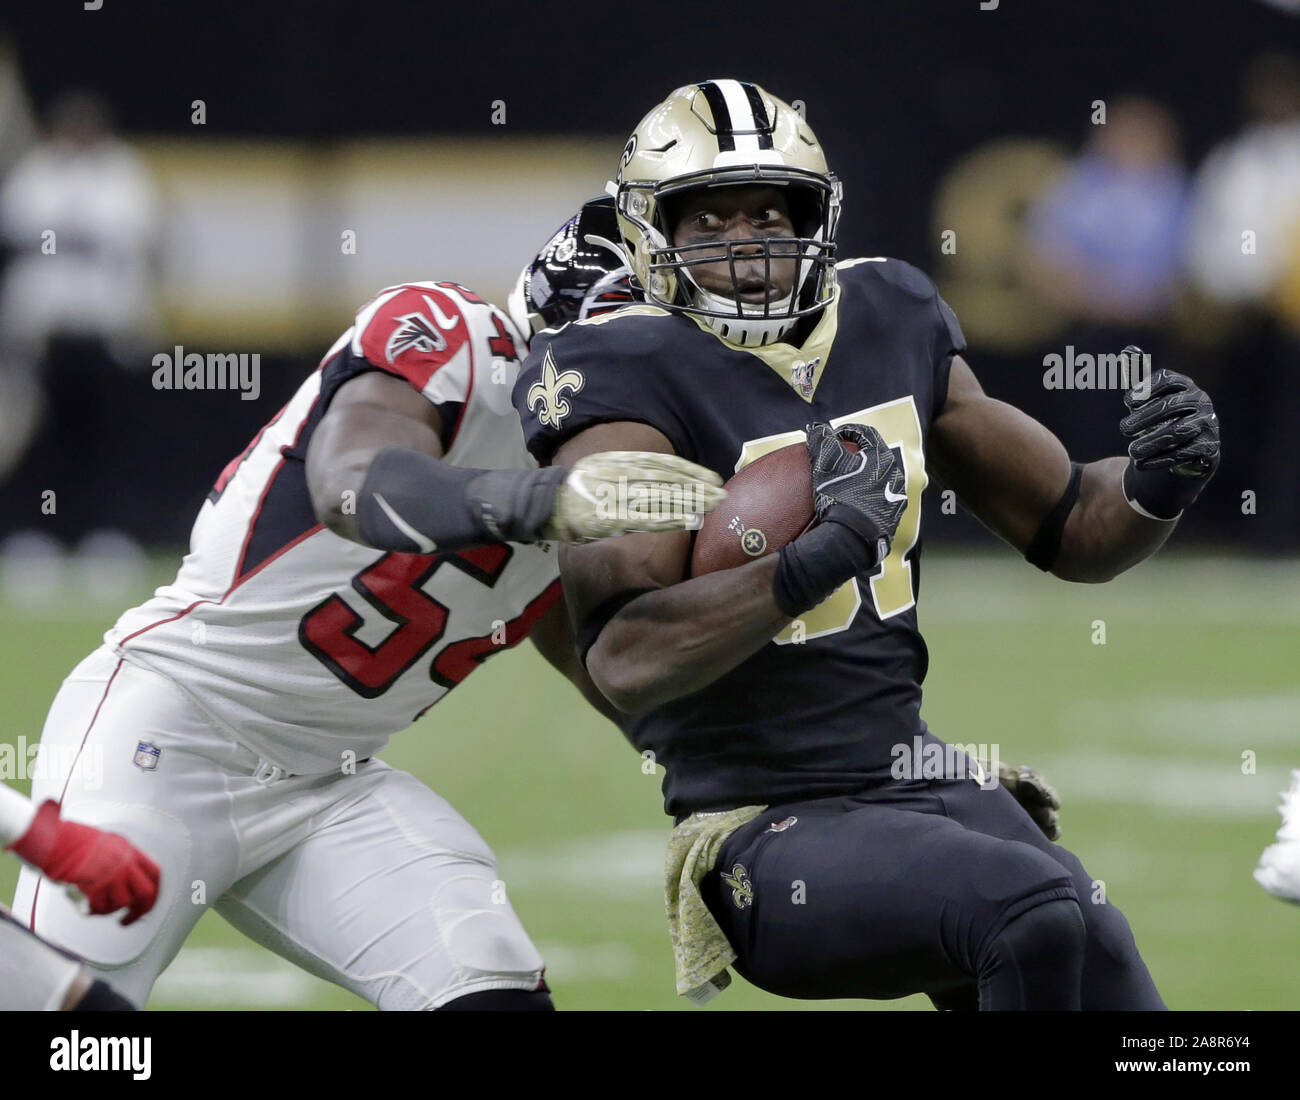 New Orleans, USA. 10th Nov, 2019. Atlanta Falcons linebacker Foye Oluokun (54) tackles New Orleans Saints tight end Jared Cook (87) at the Mercedes-Benz Superdome in New Orleans on Sunday, November 10, 2019. Photo by AJ Sisco/UPI Credit: UPI/Alamy Live News Stock Photo